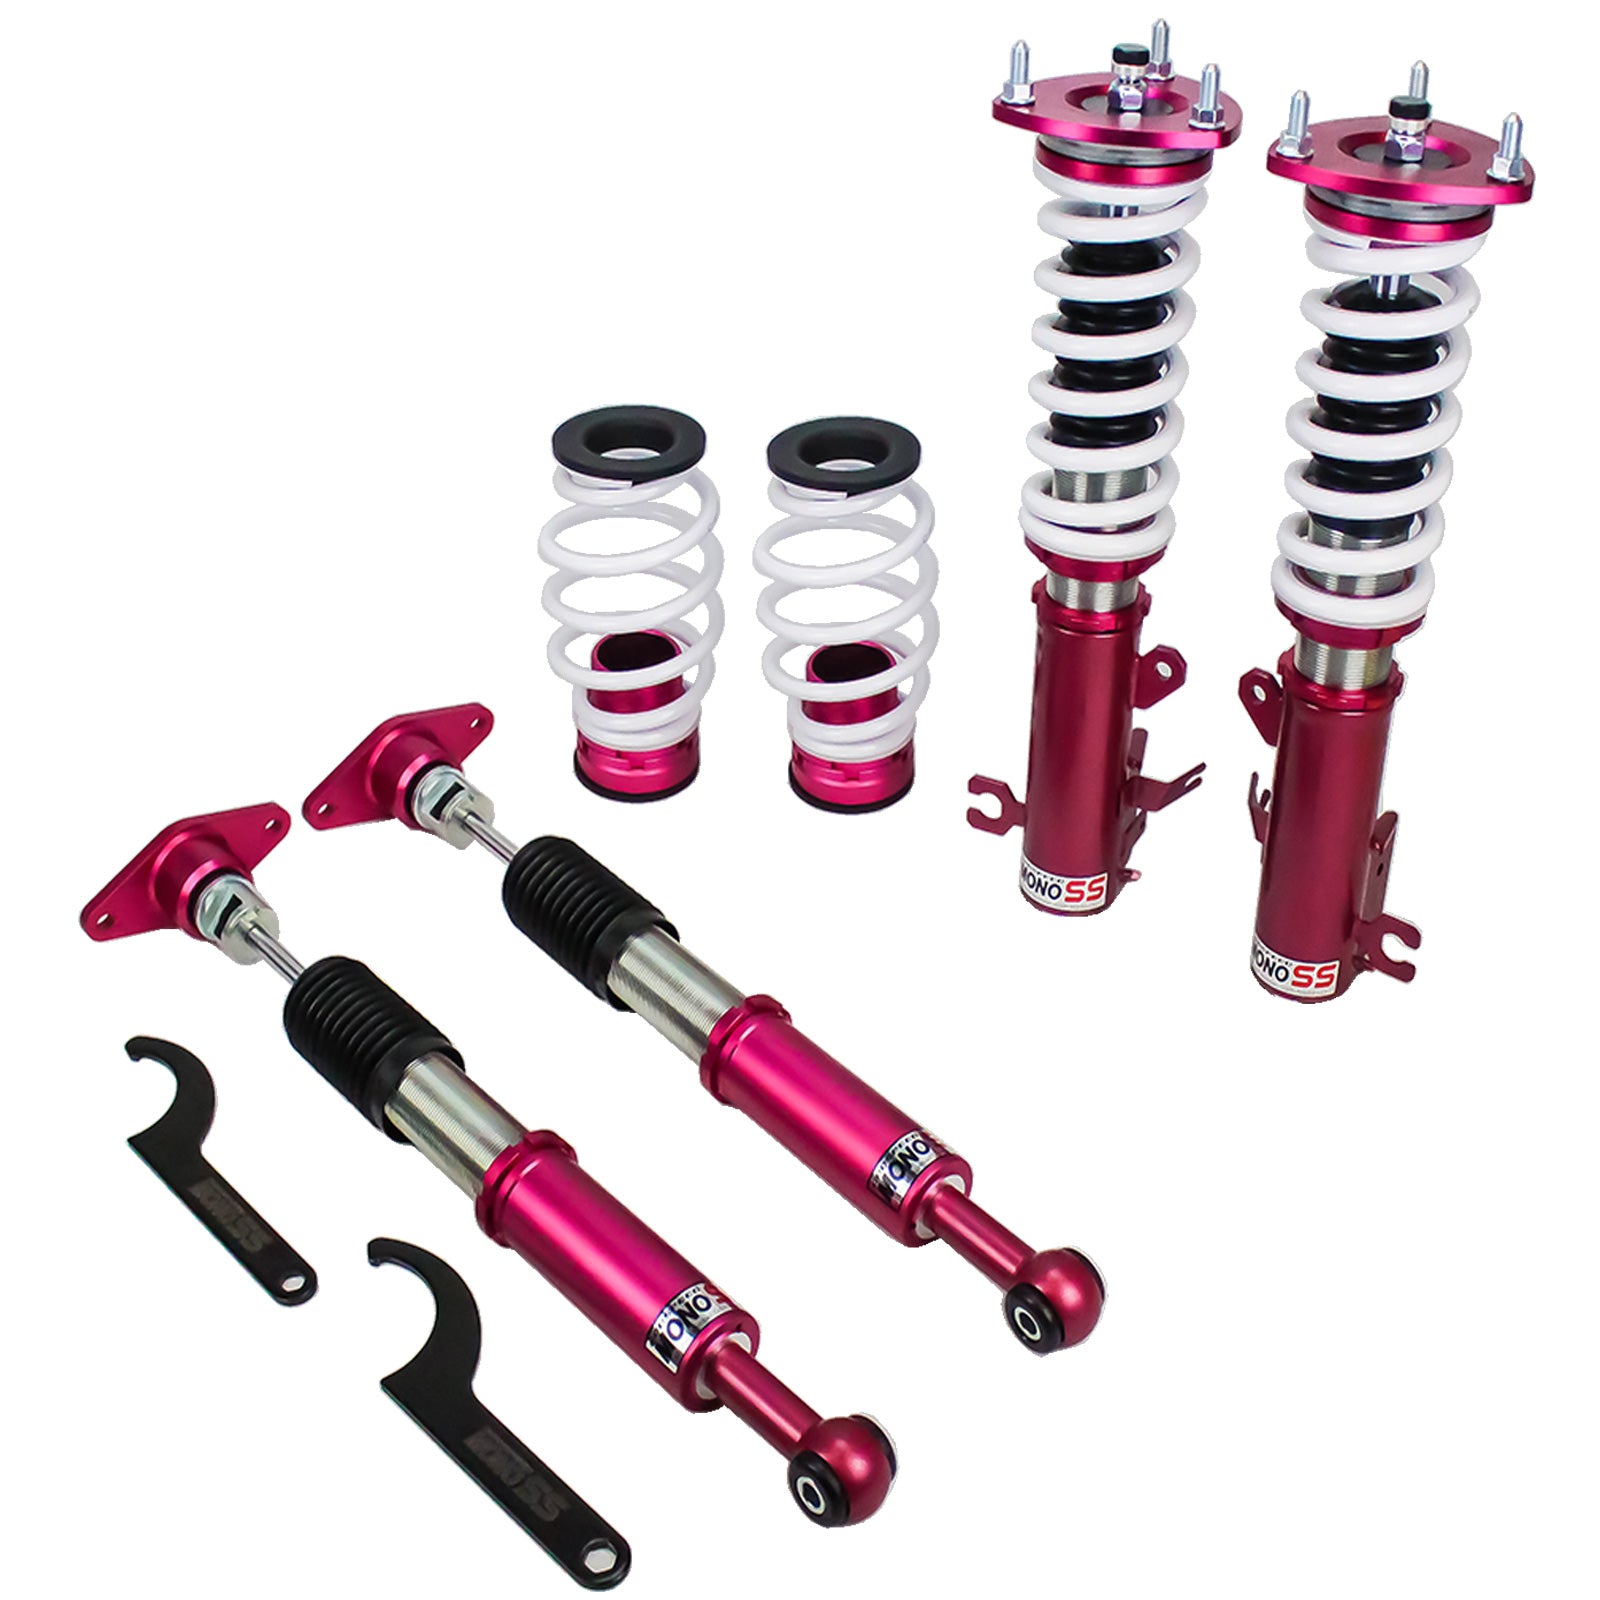 Godspeed MSS0123-B MonoSS Coilover Lowering Kit, Fully Adjustable, Ride Height, Spring Tension And 16 Click Damping, Mazda 2(CR) 2015+UP